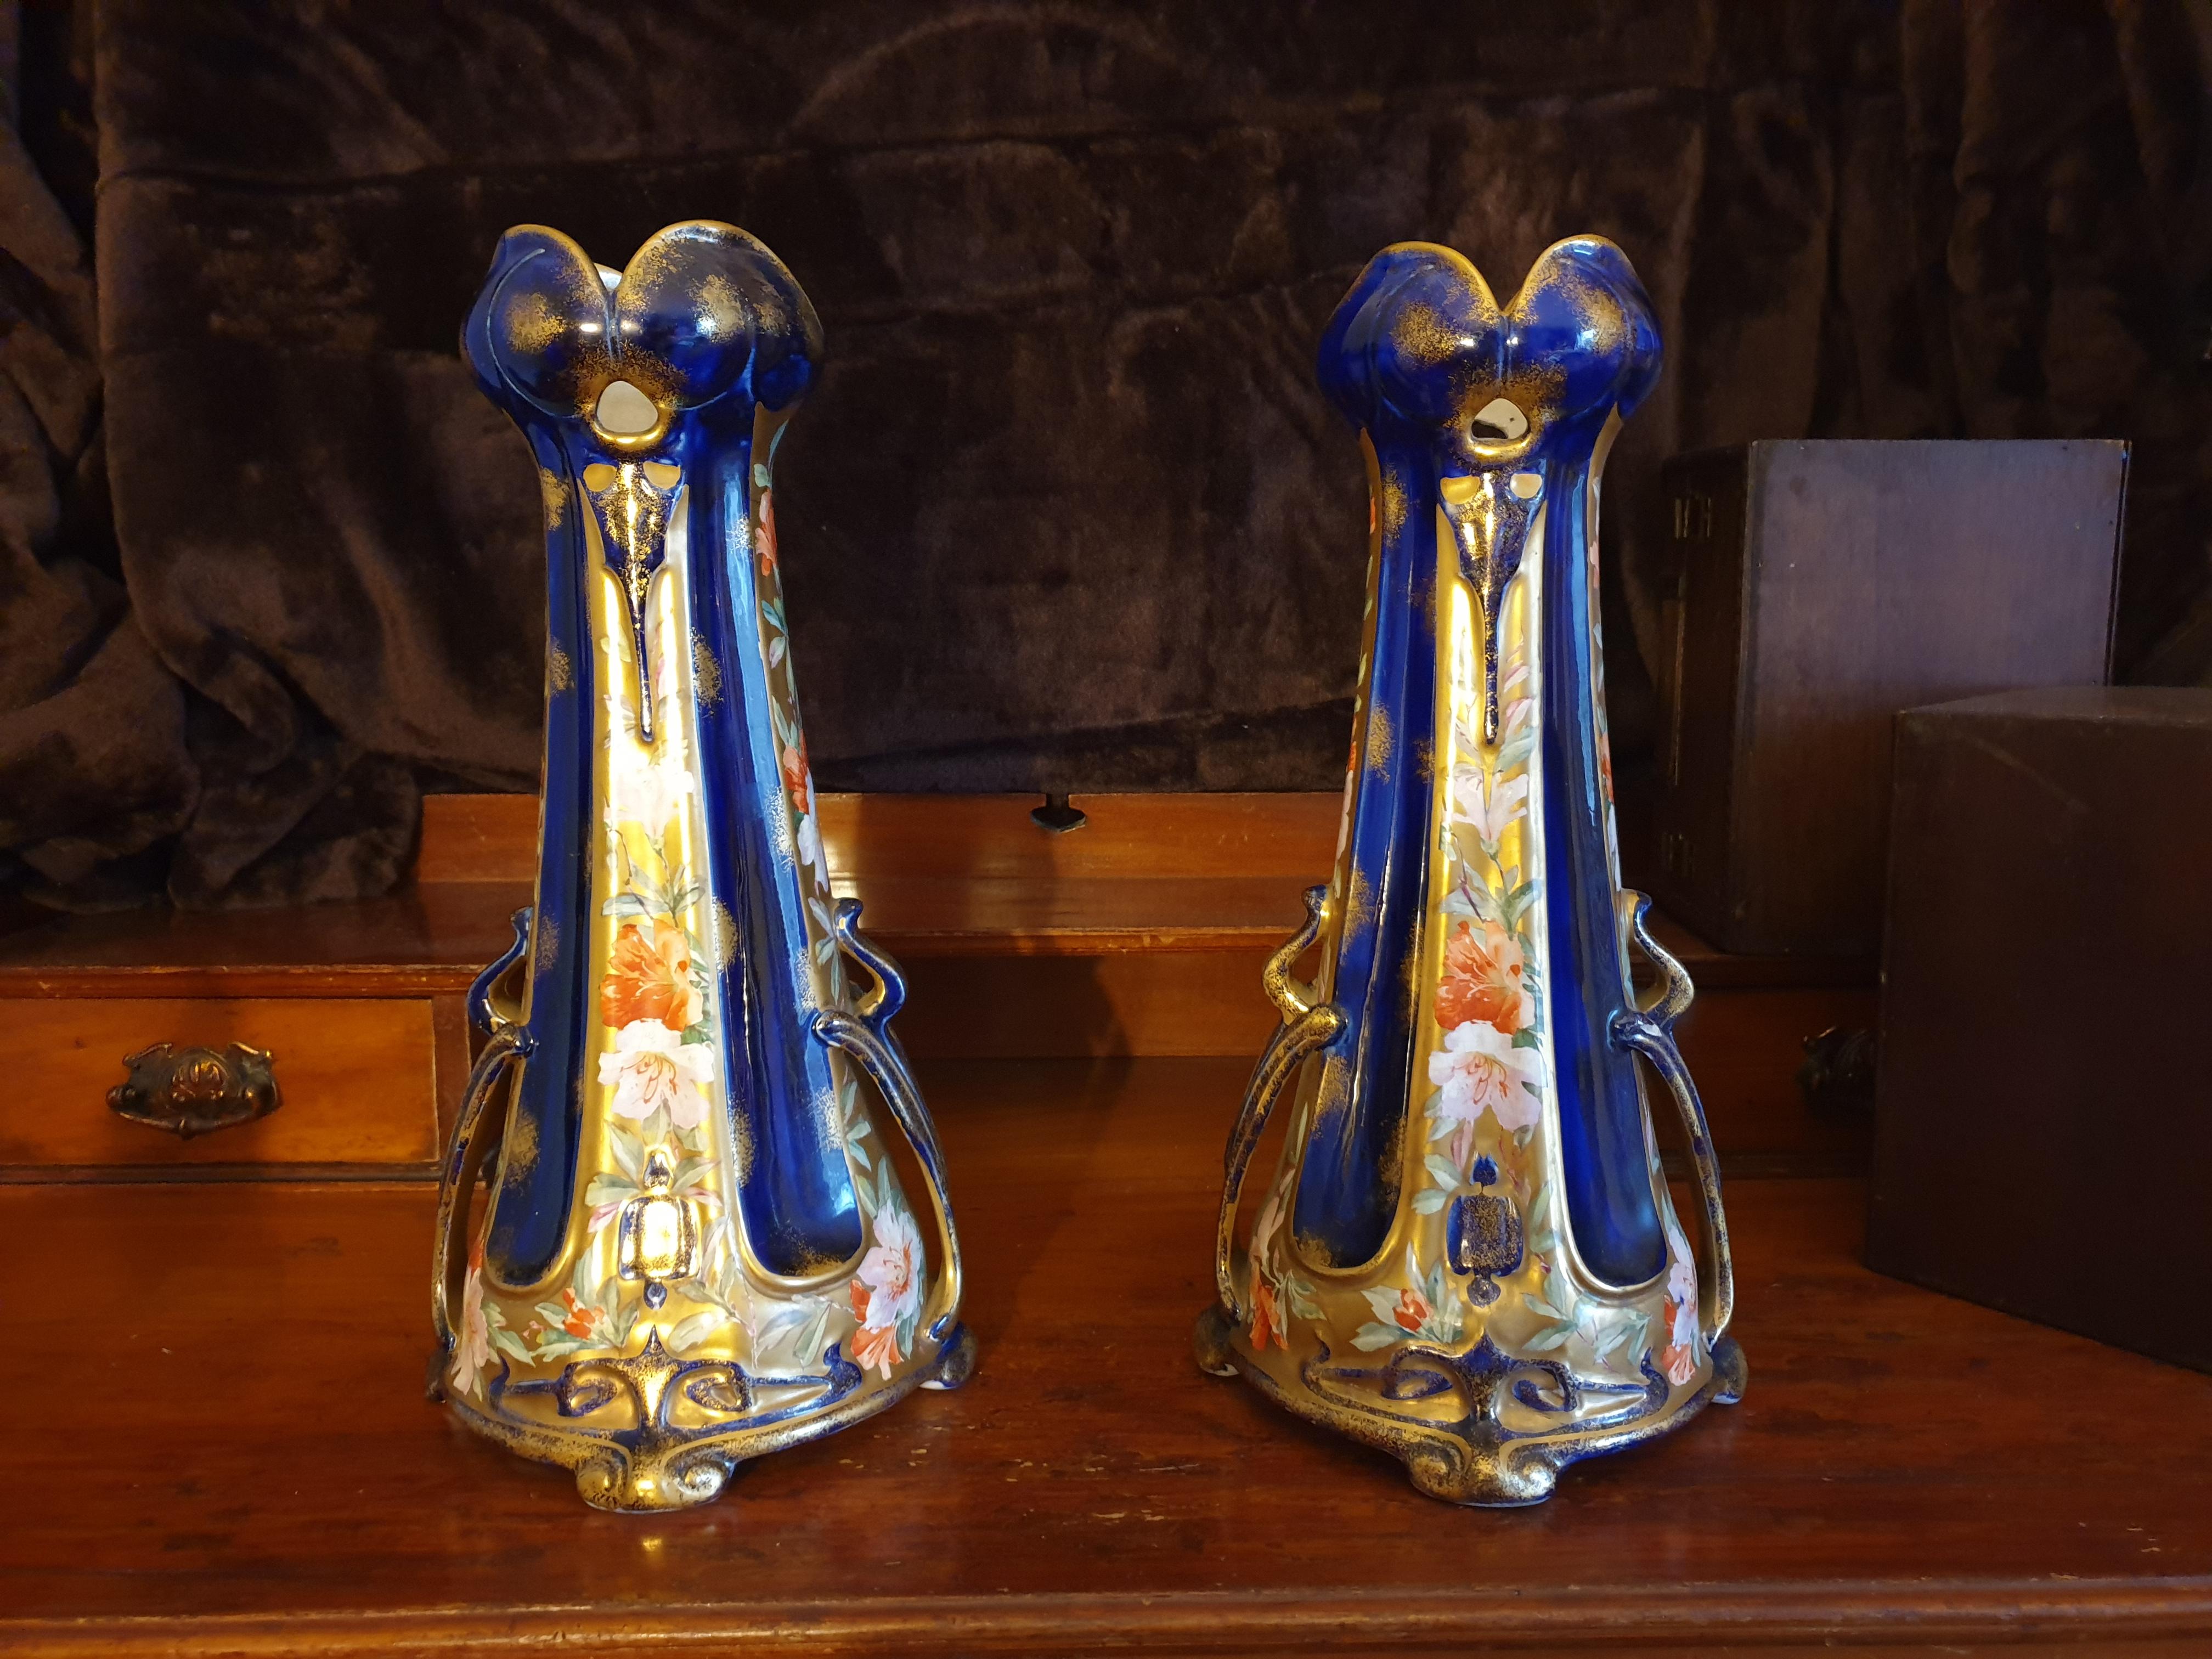 A pair of Art Nouveau English manufactured, cobalt blue ground and hand painted flowers scrolling up the side paneling. An assortment of flowers and roses with heavy 24-karat gold gilding finish all around the vase including the rounded quatrefoil